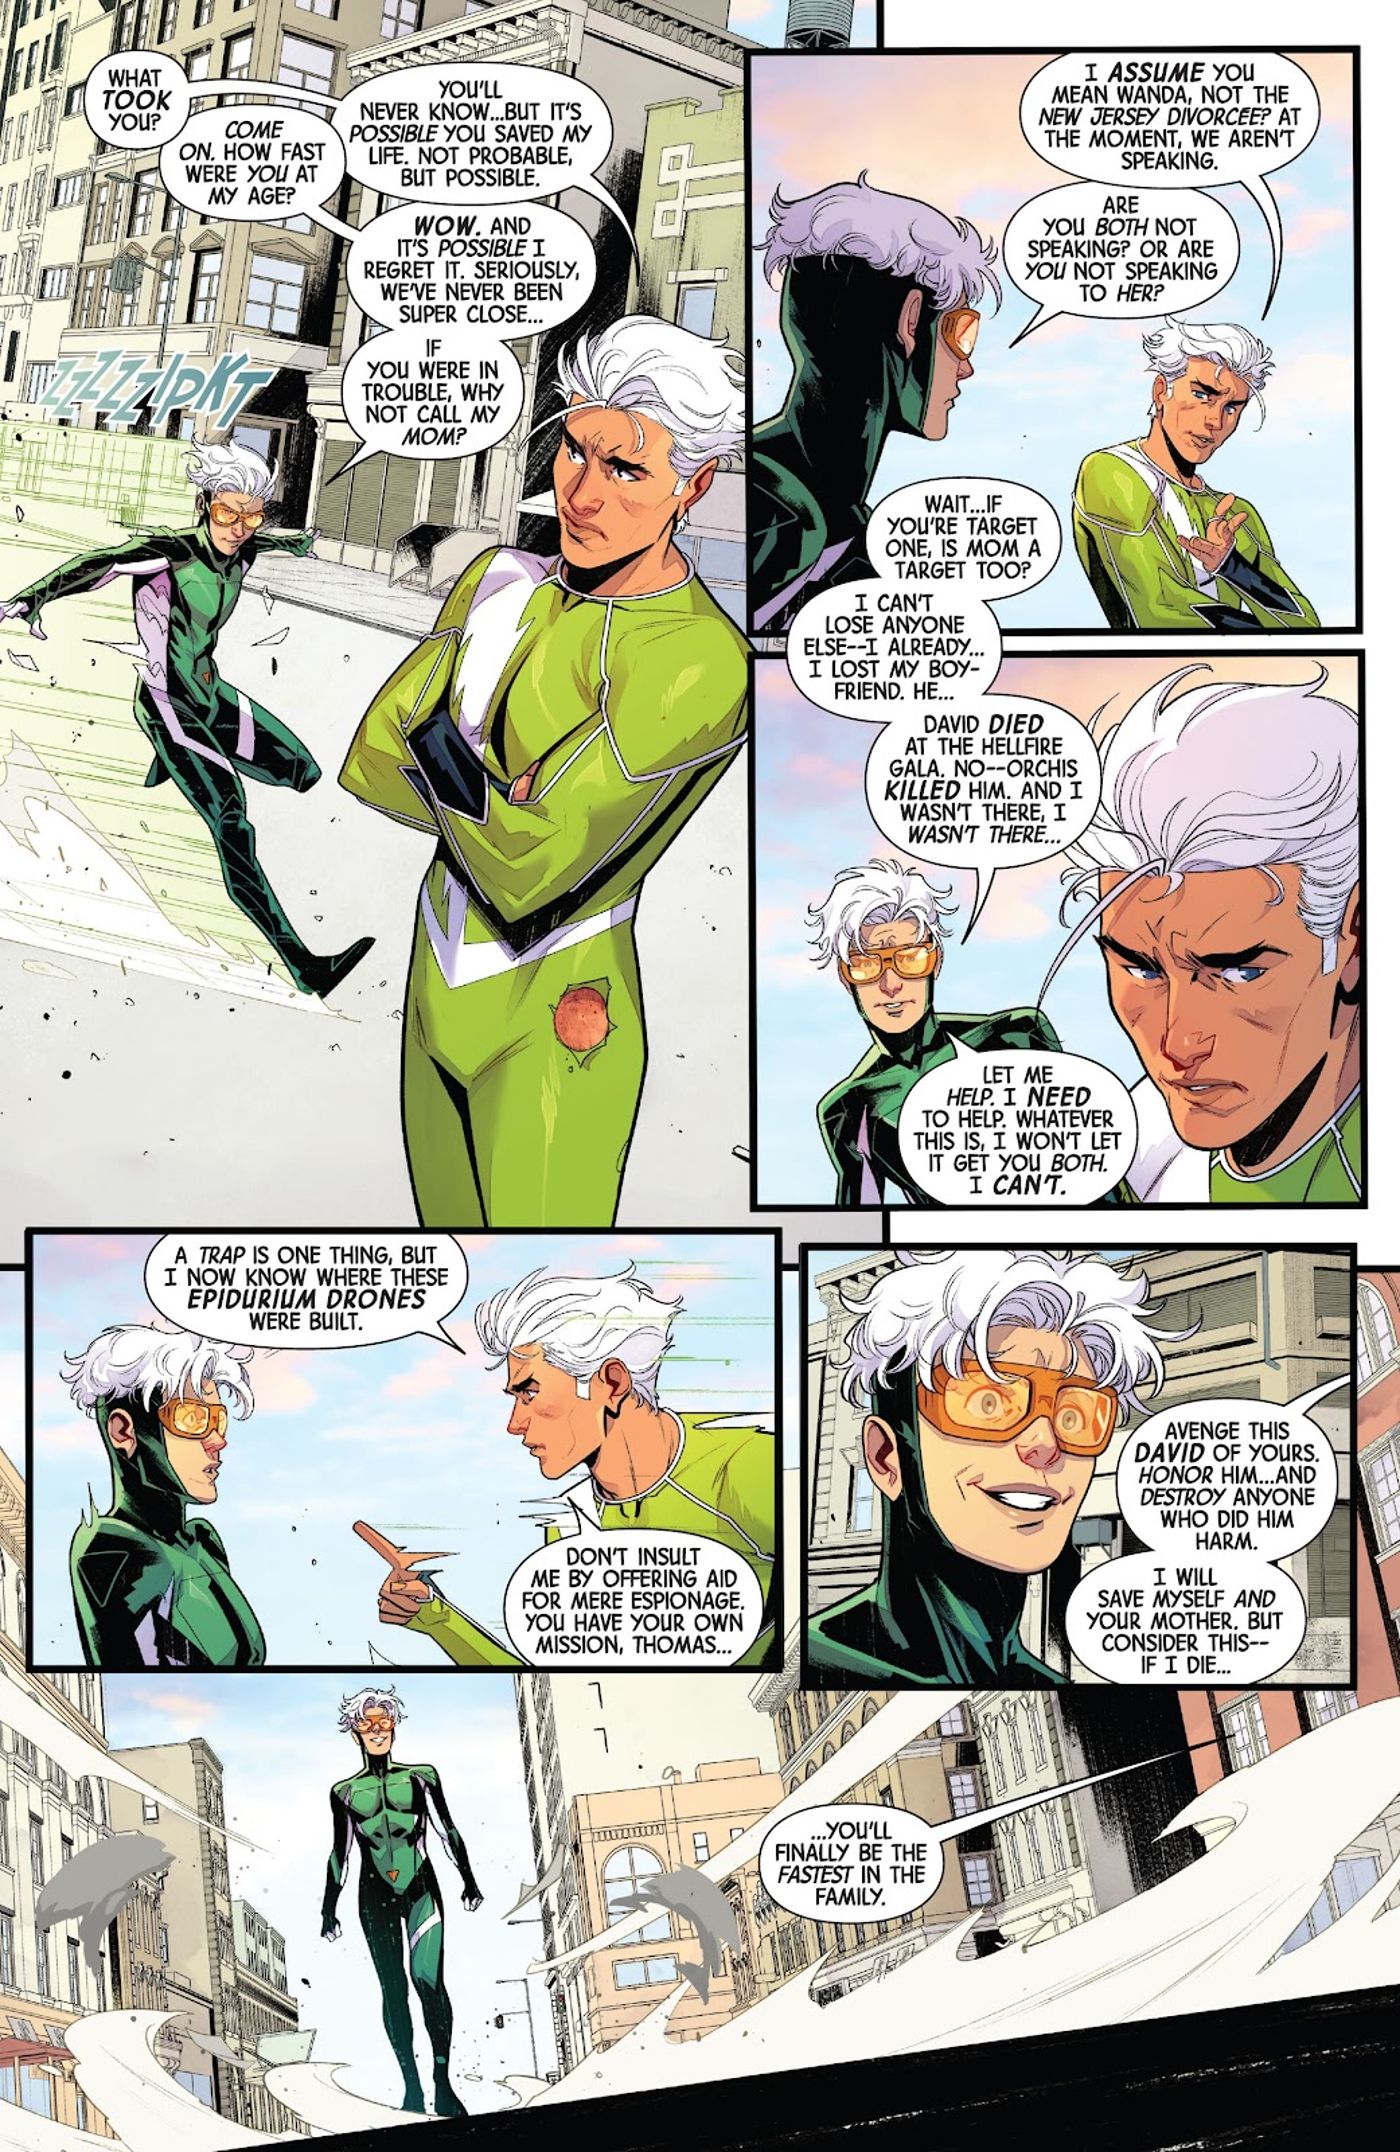 Speed catches up to Quicksilver and they converse before Quicksilver runs off panel. 